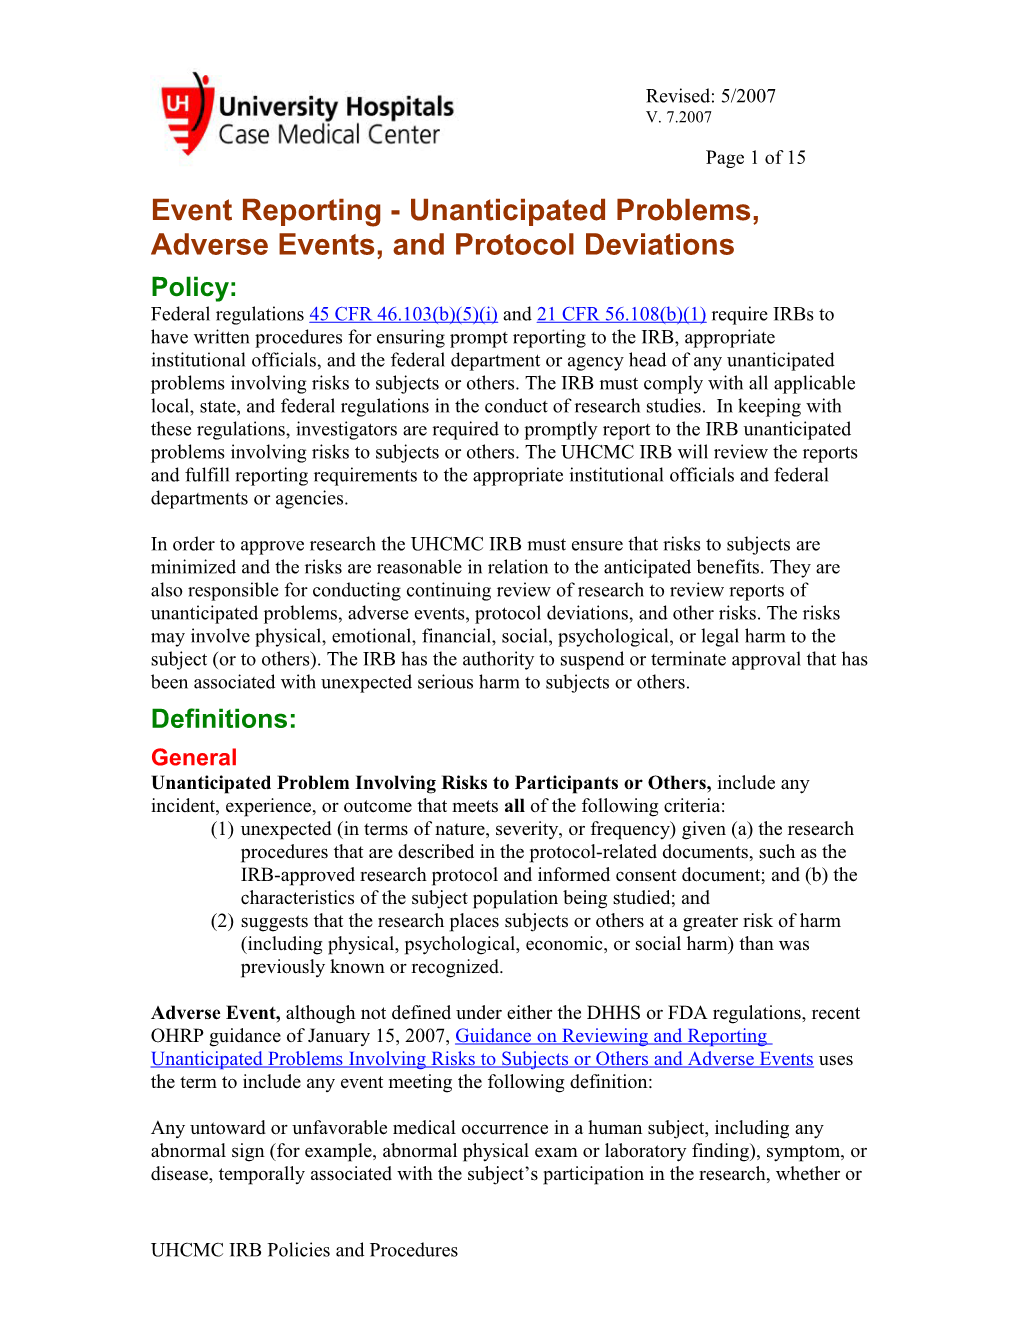 Event Reporting - Unanticipated Problems, Adverse Events, and Protocol Deviations